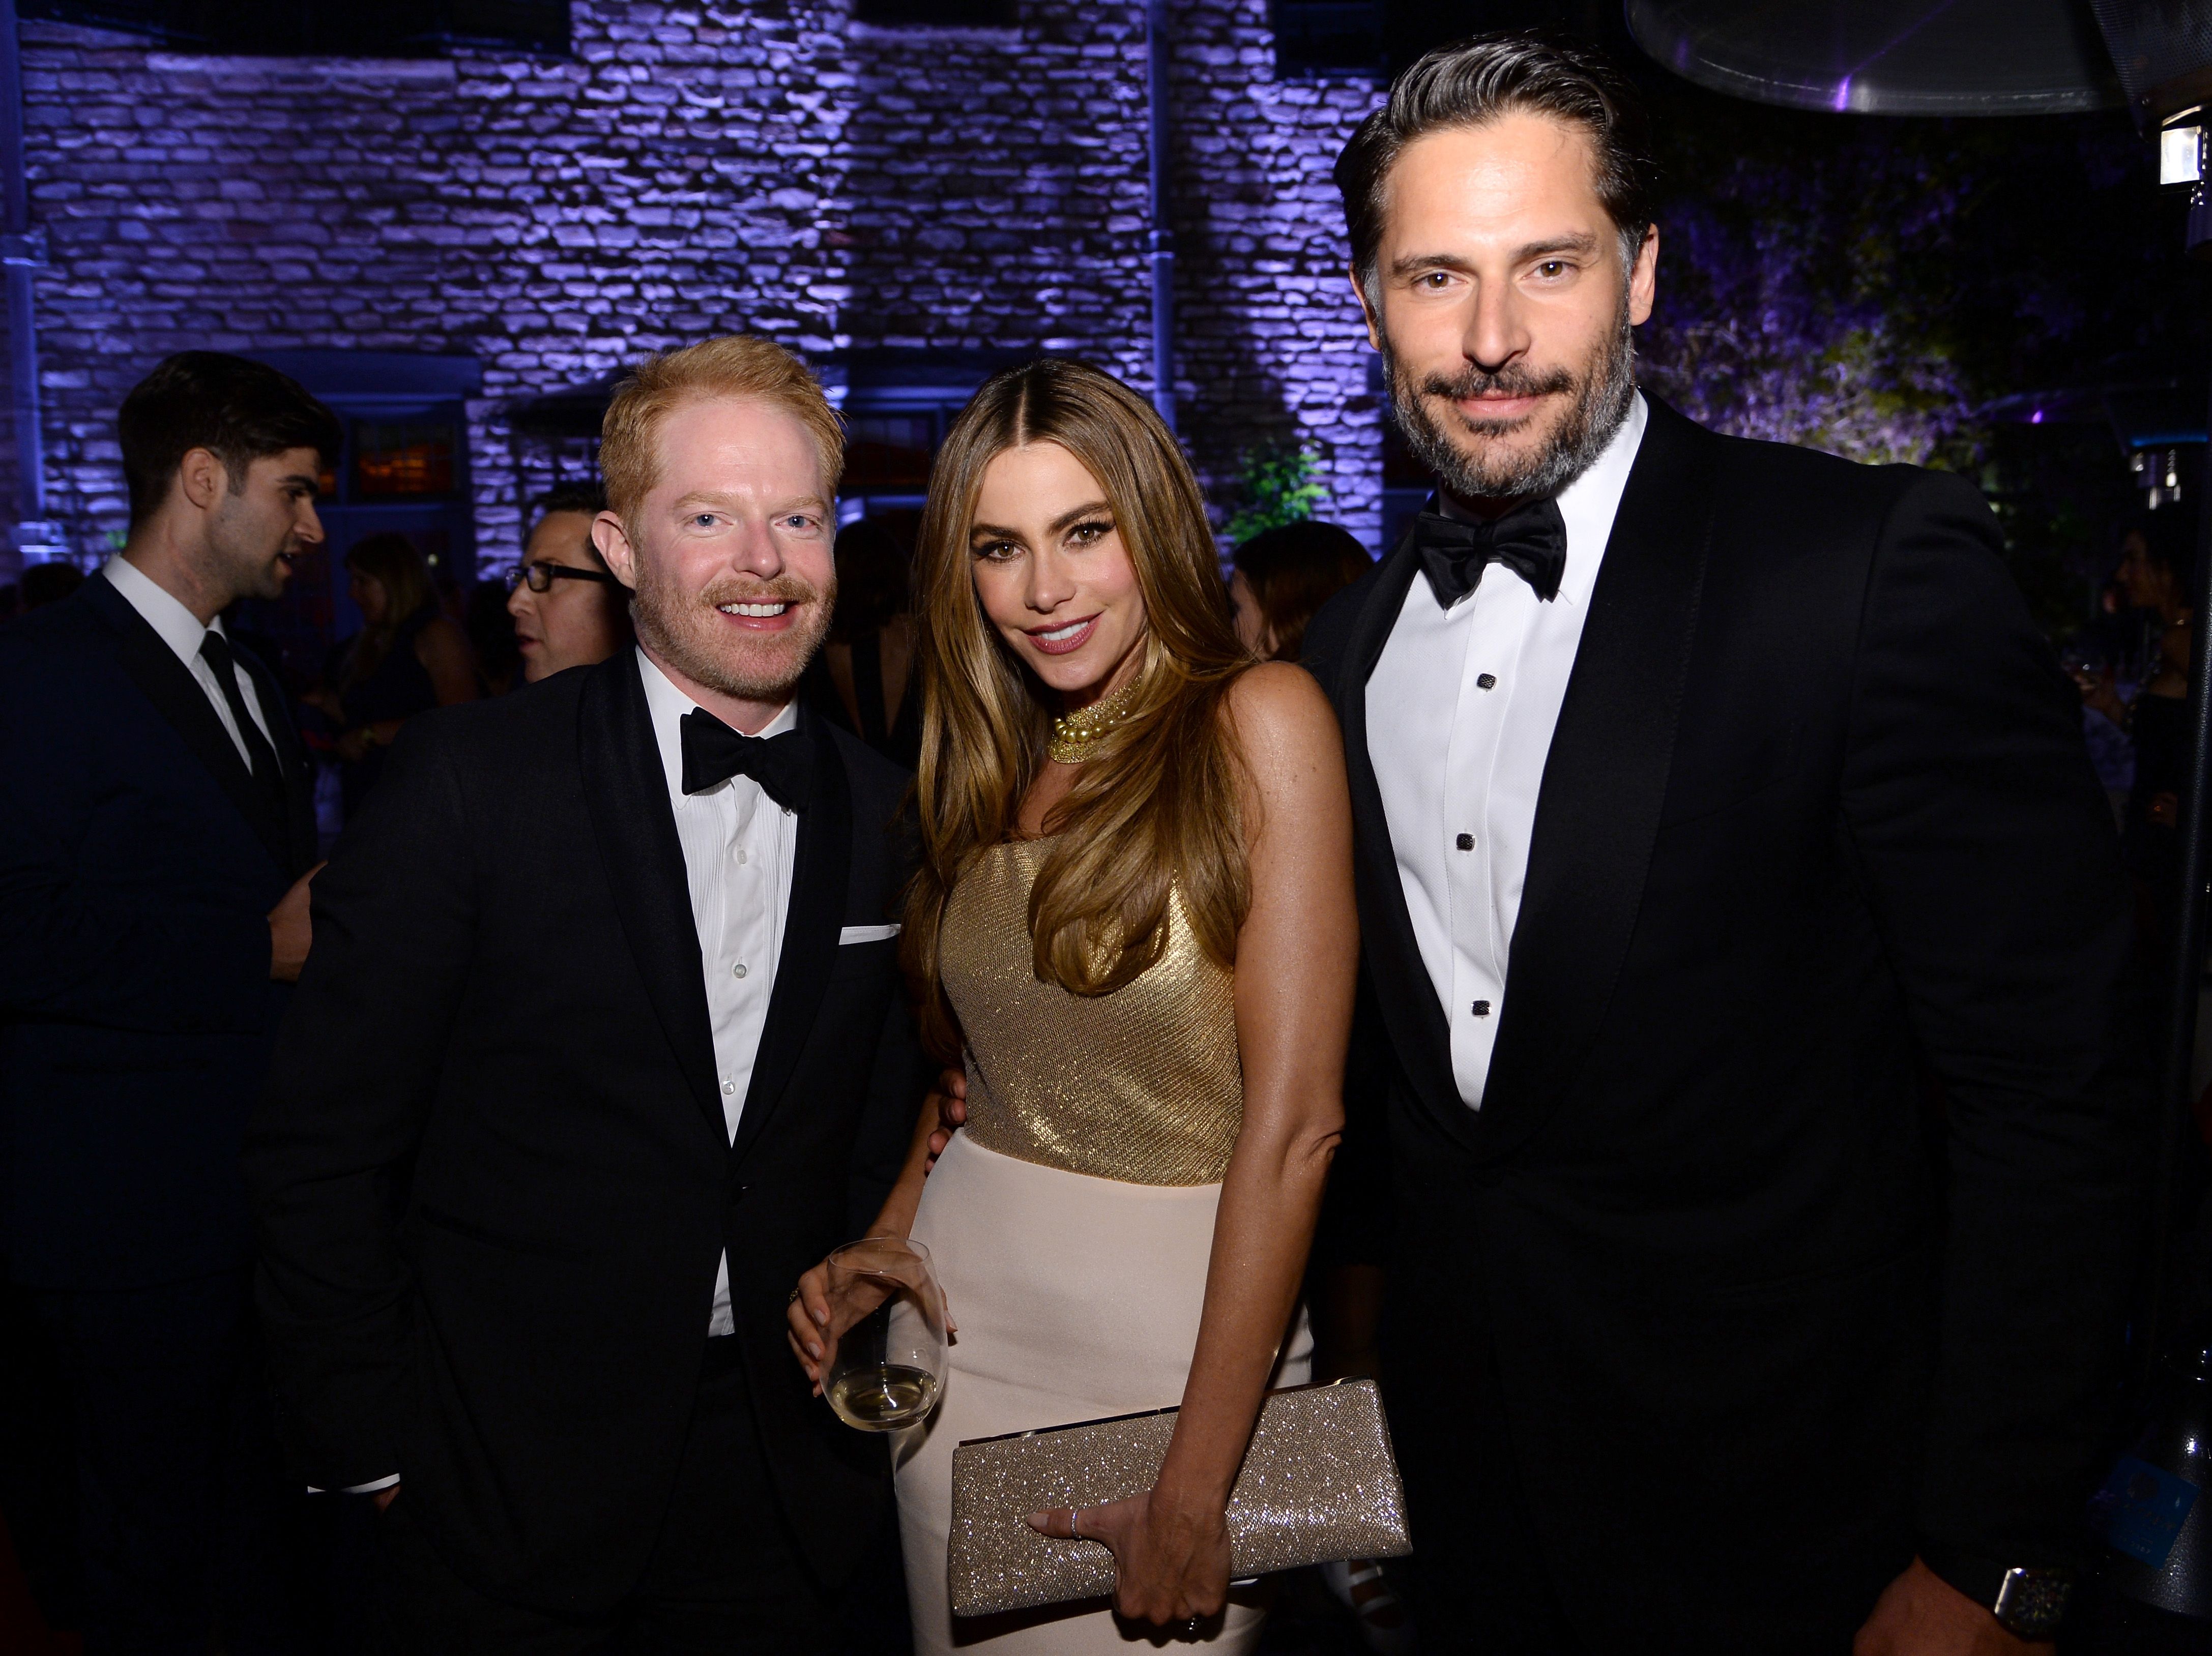 Jesse Tyler Ferguson, Sofia Vergara and Joe Manganiello at the Bloomberg & Vanity Fair cocktail reception in May 2014 in Washington, DC | Source: Getty Images